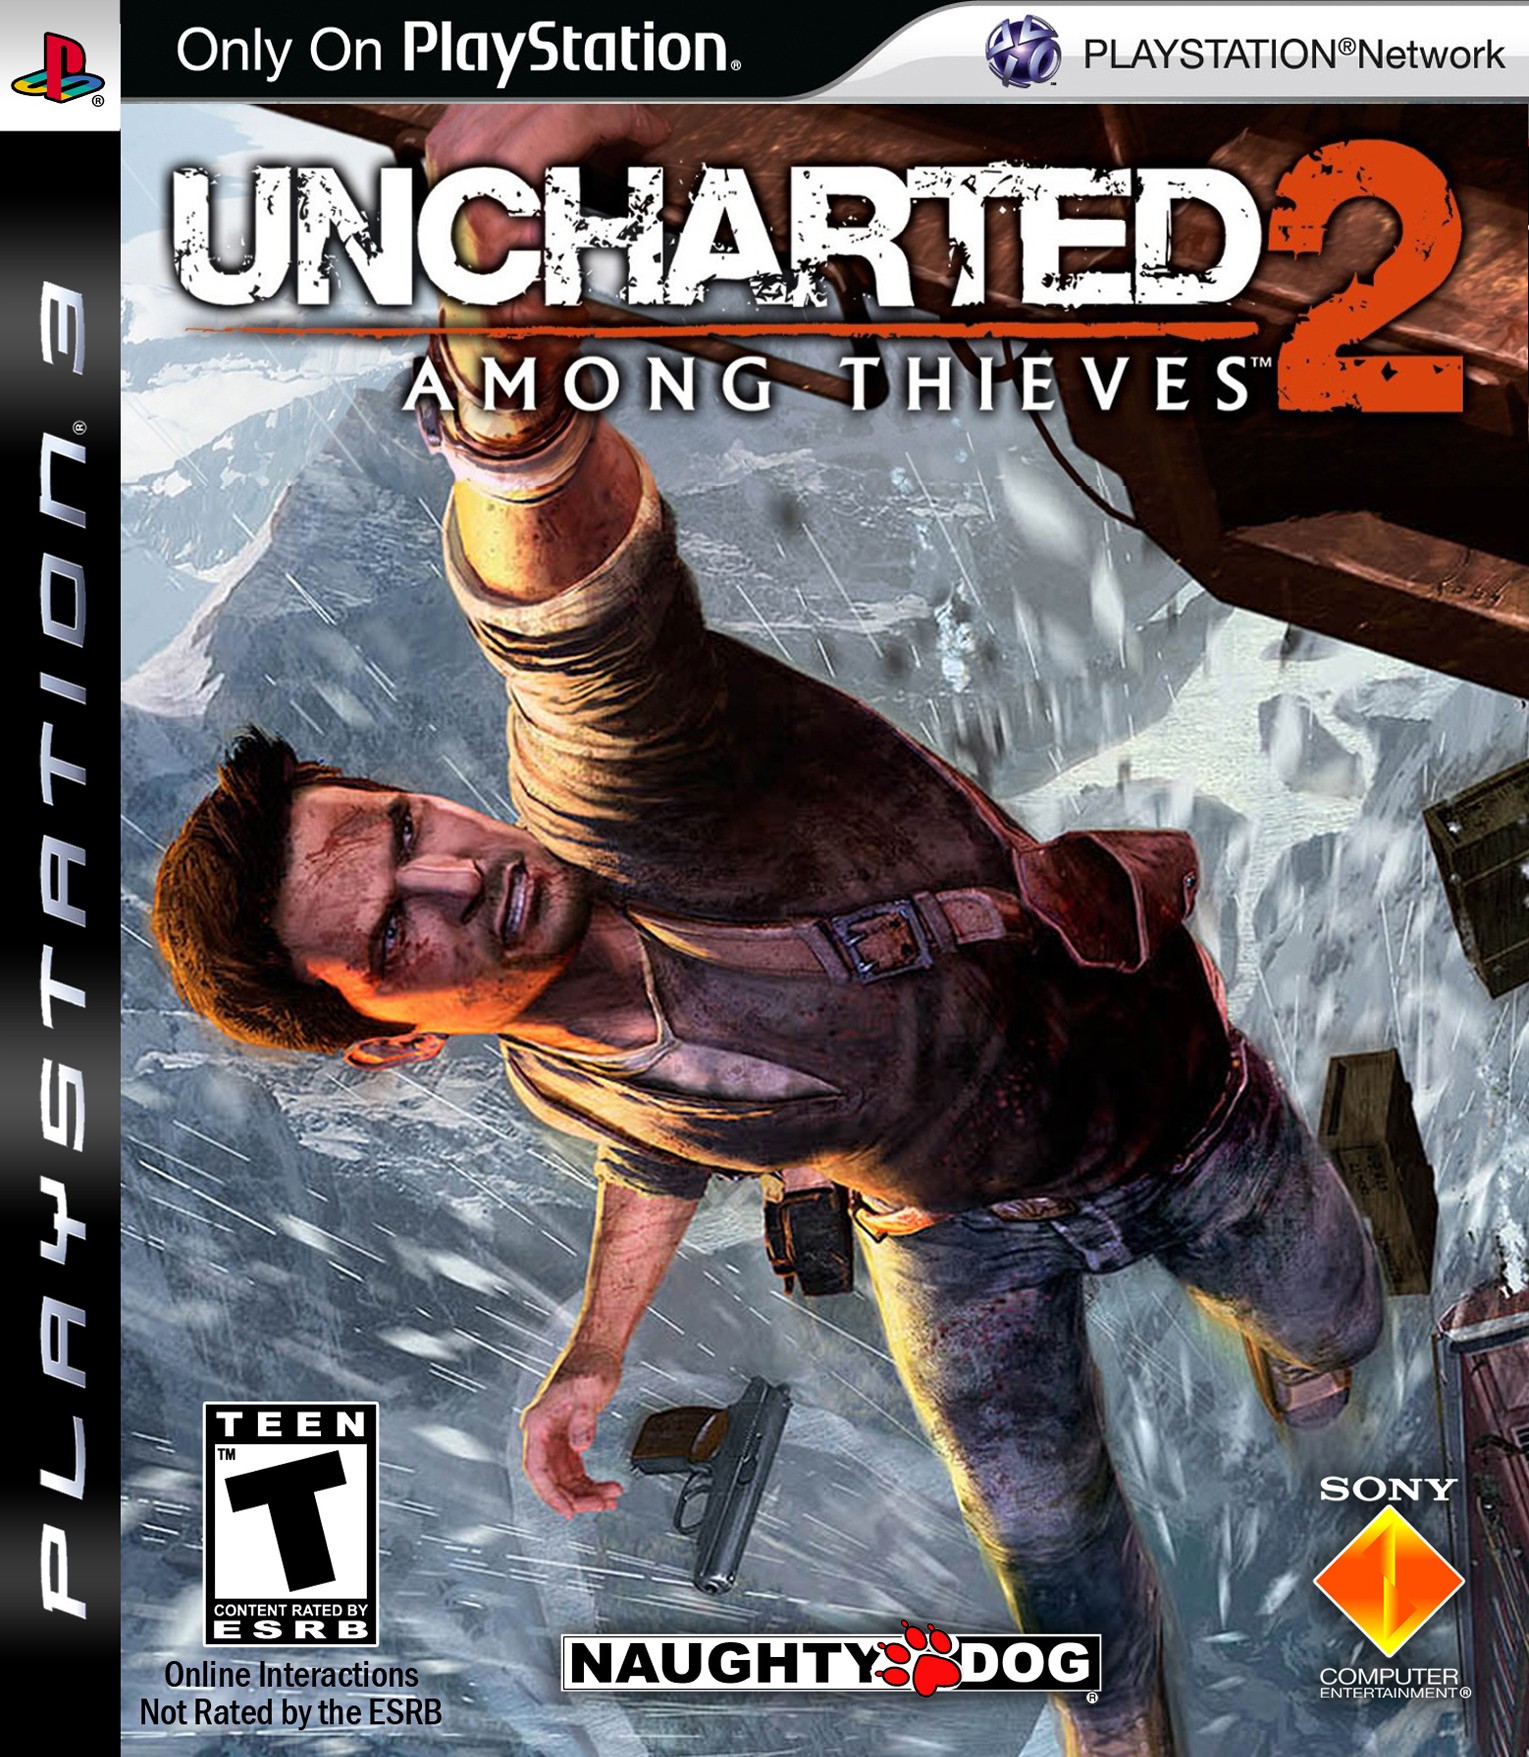 'Uncharted 2: Among Thieves'